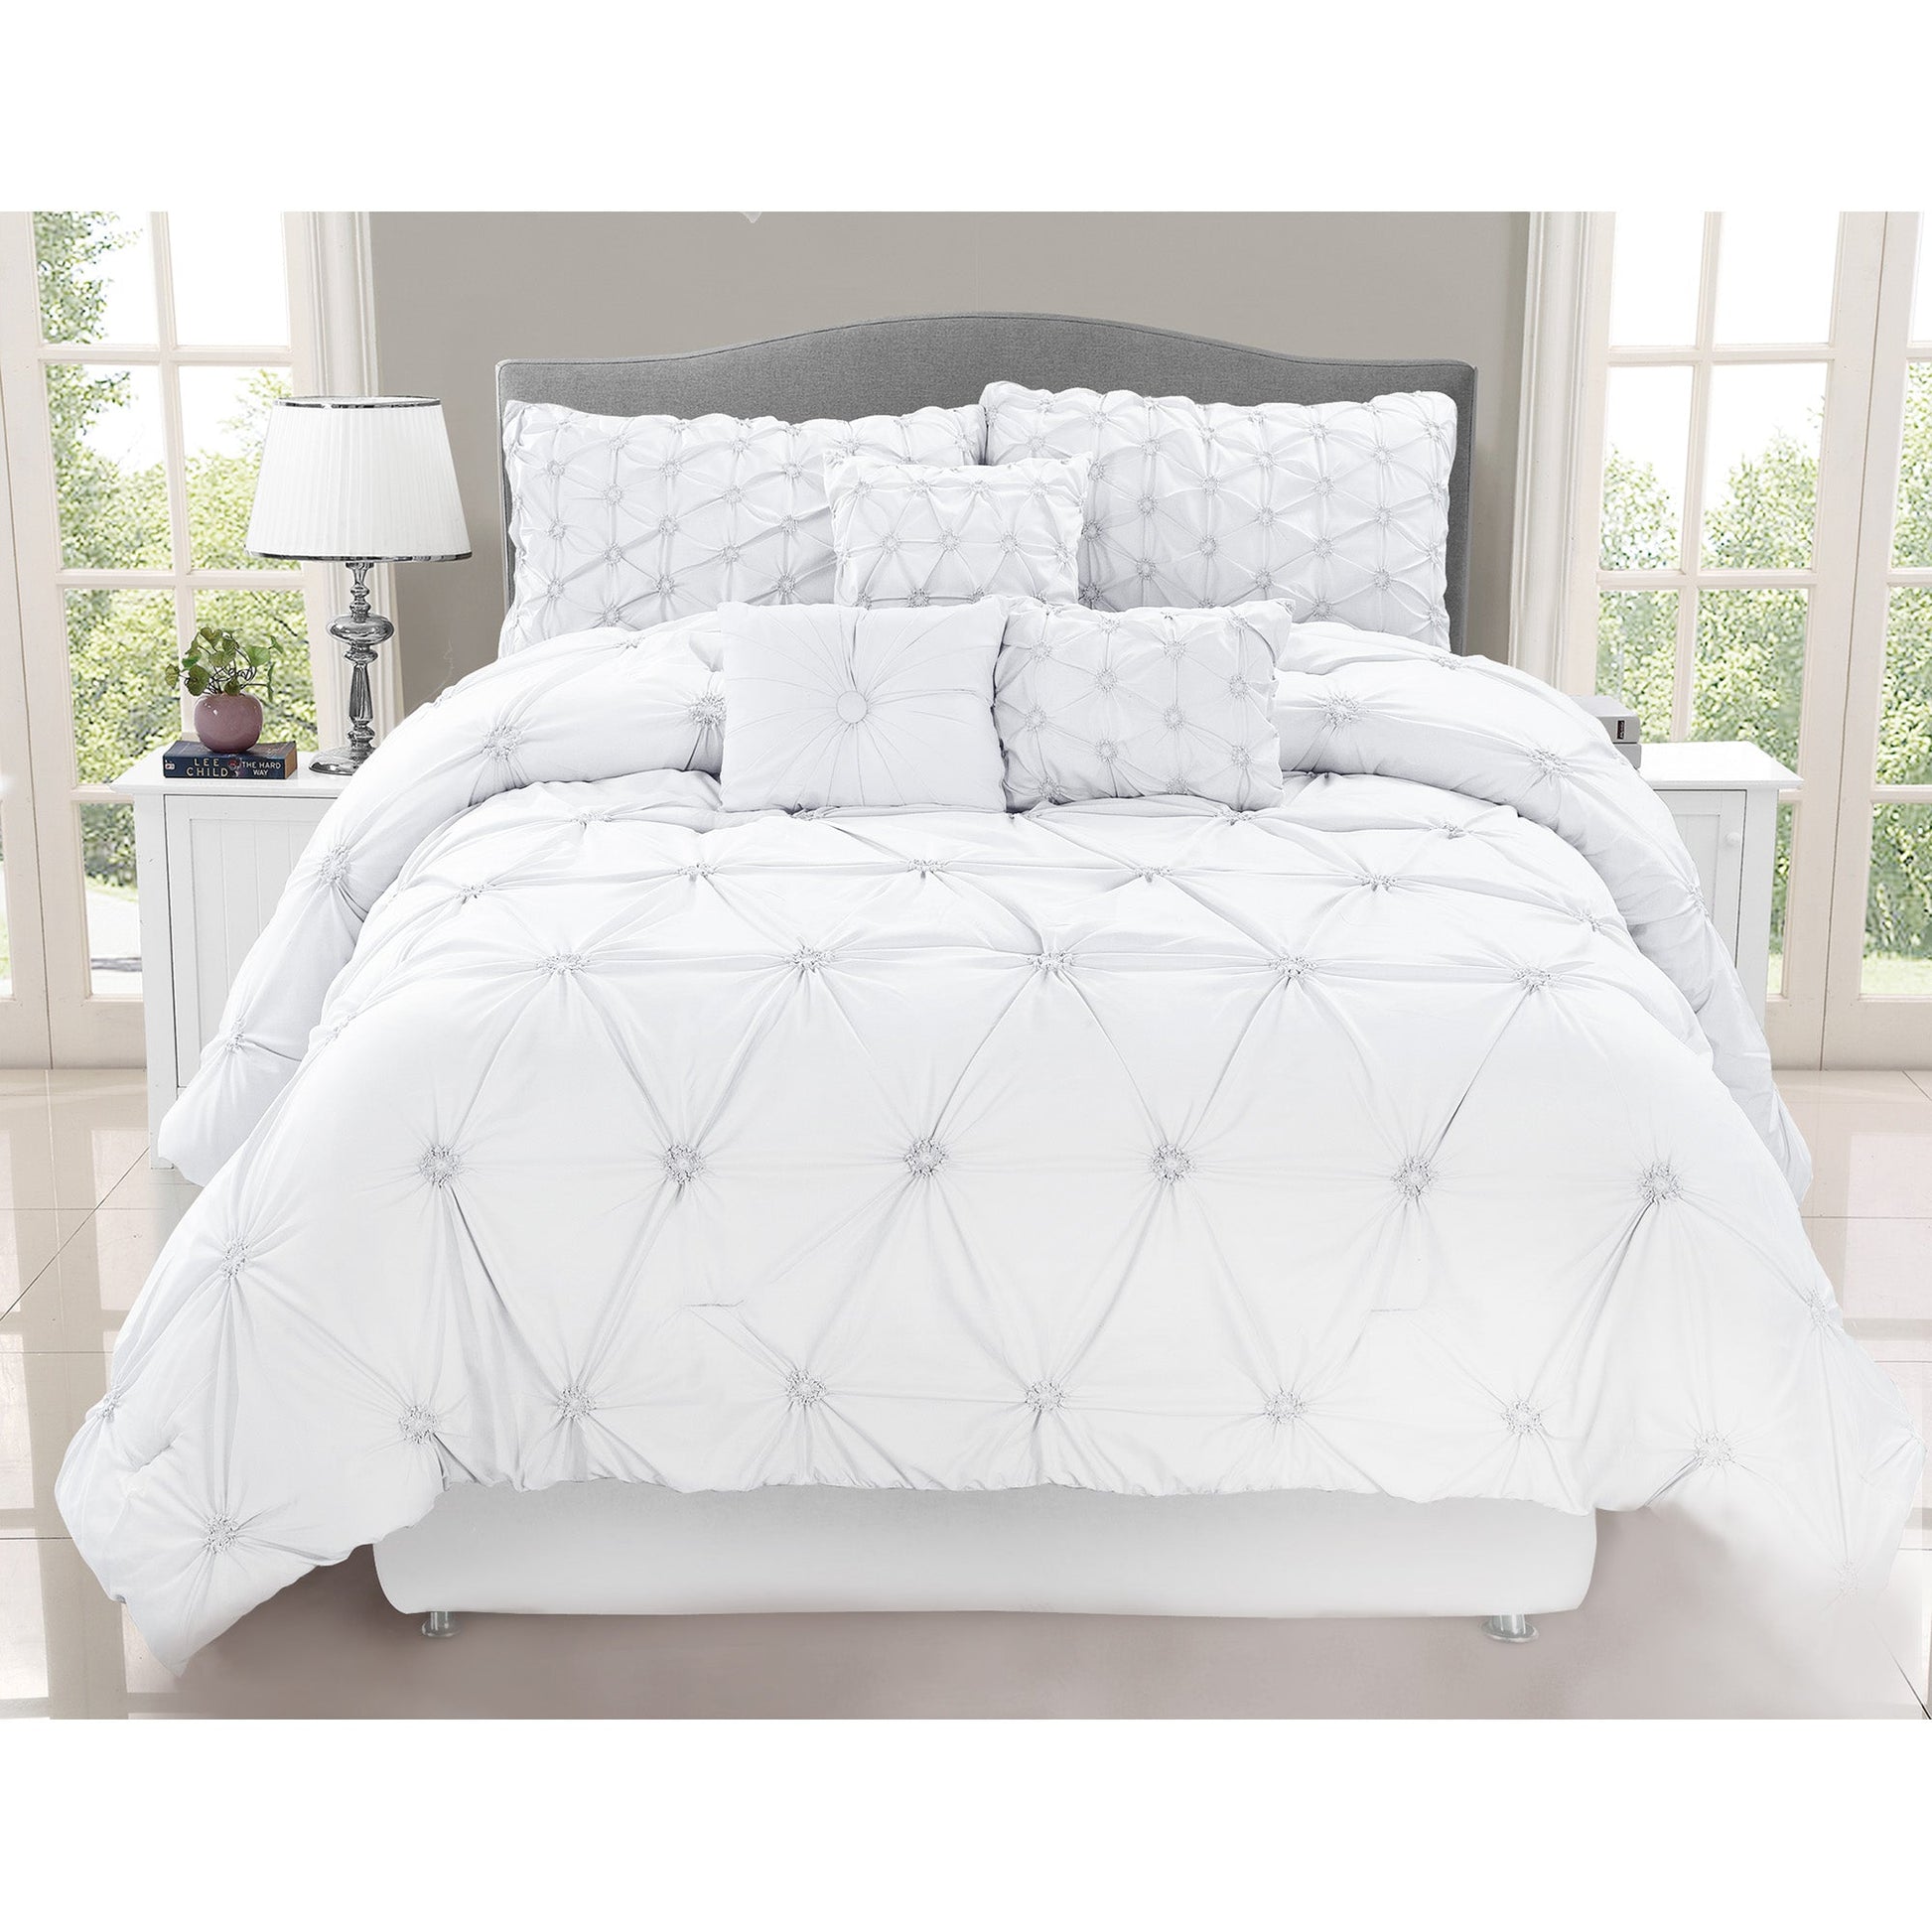 Comforter Chateau 7 Piece King White